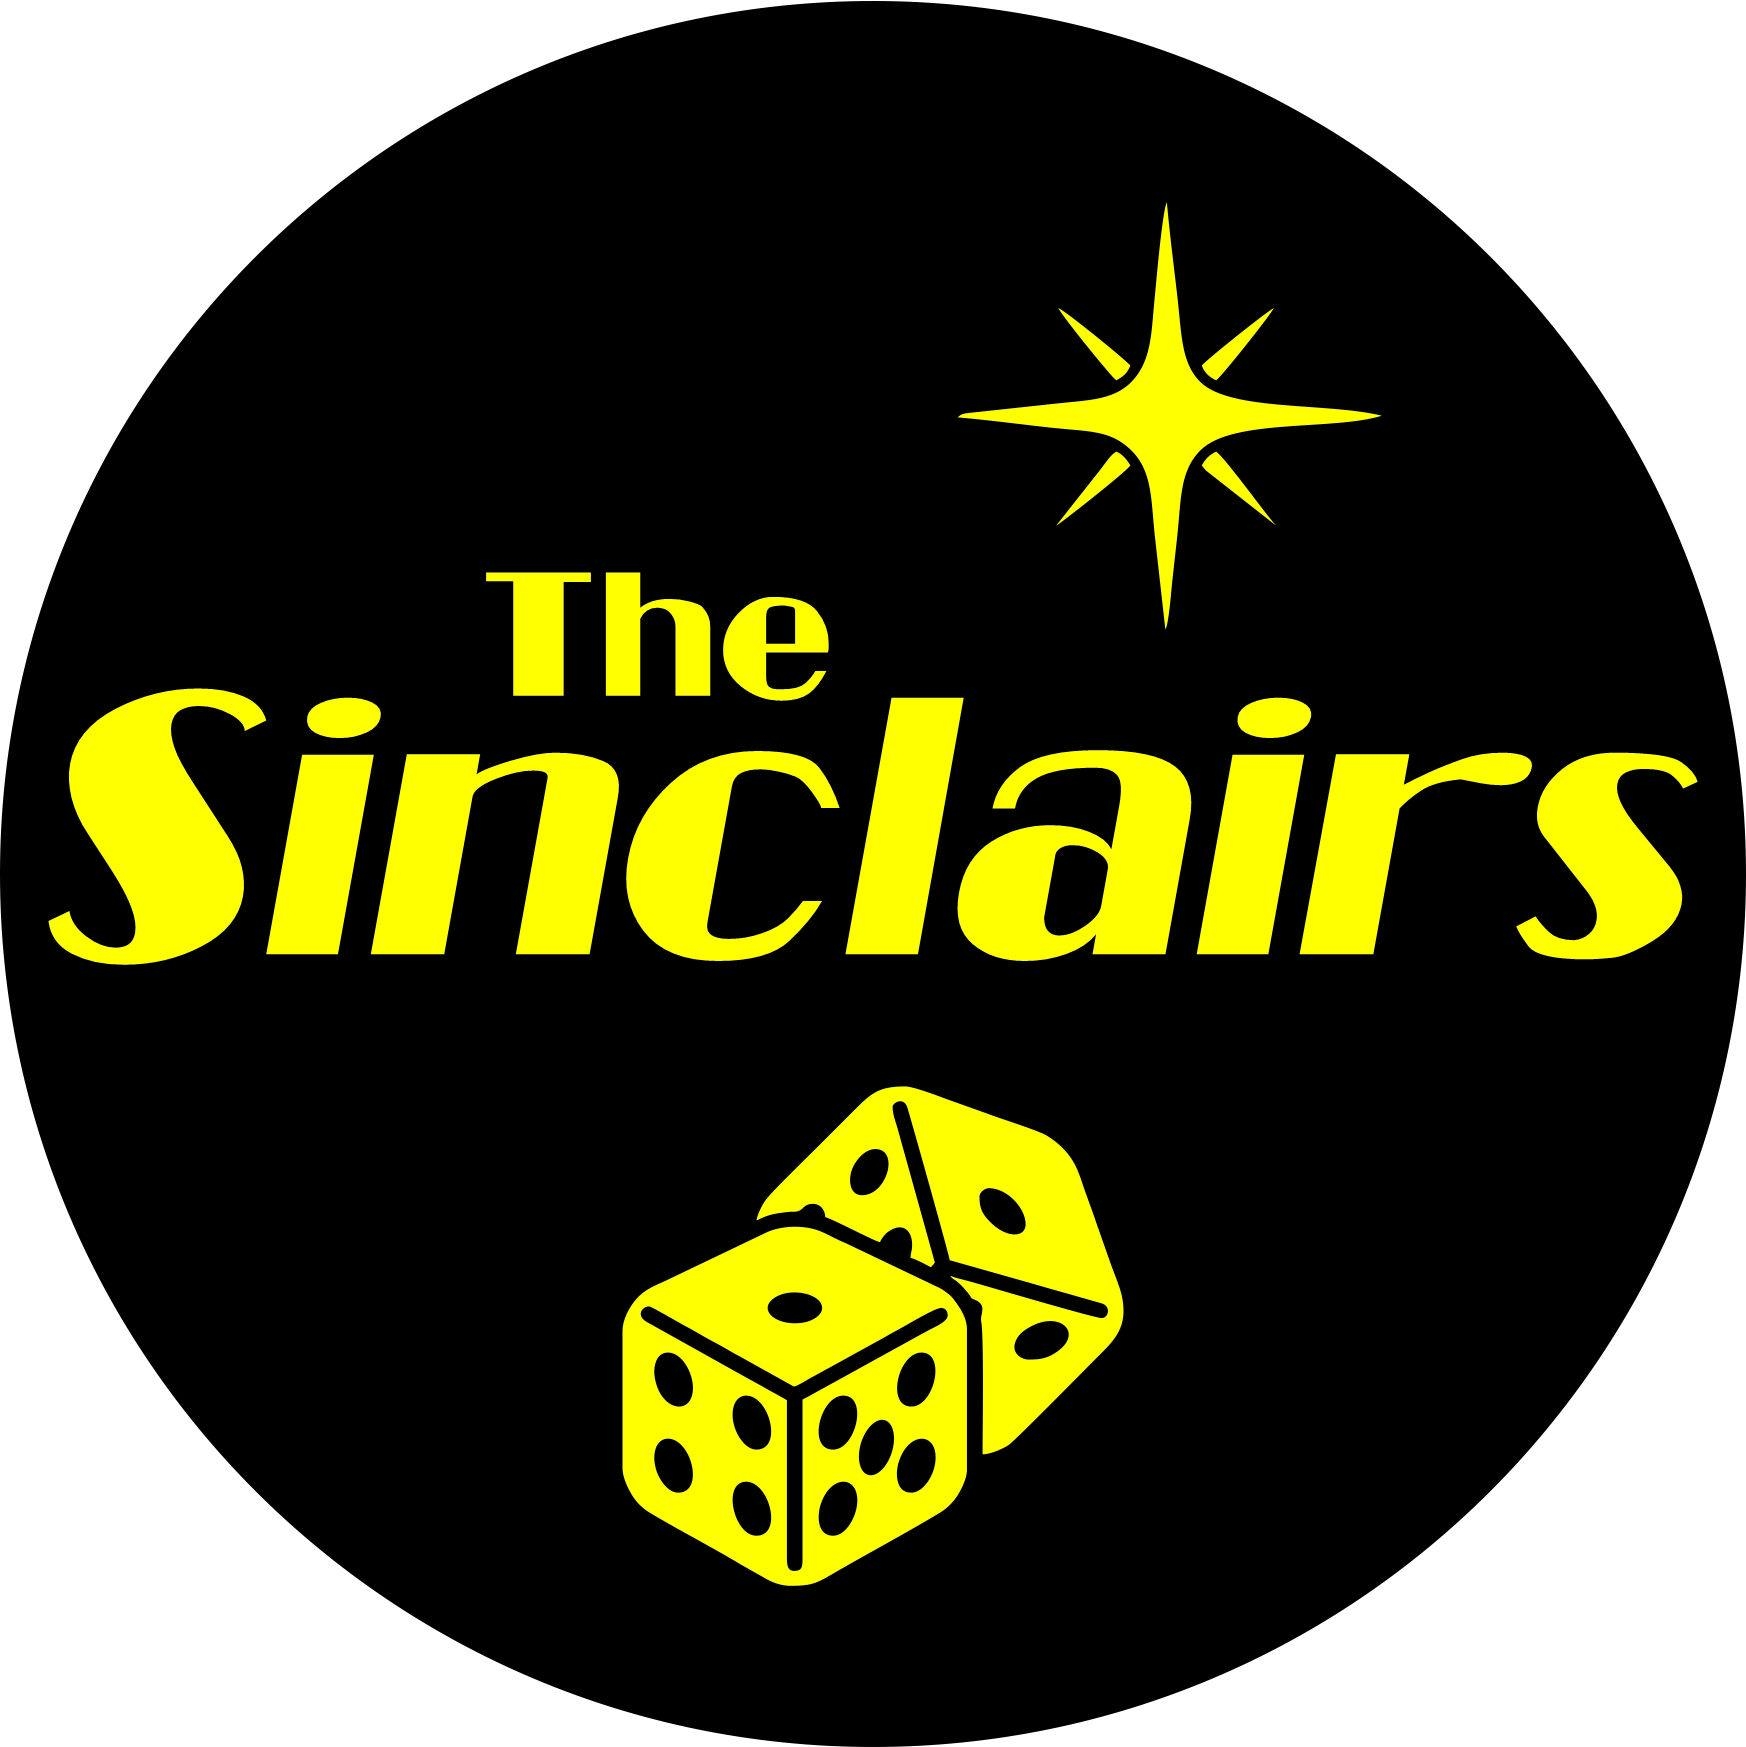 The Sinclairs Band